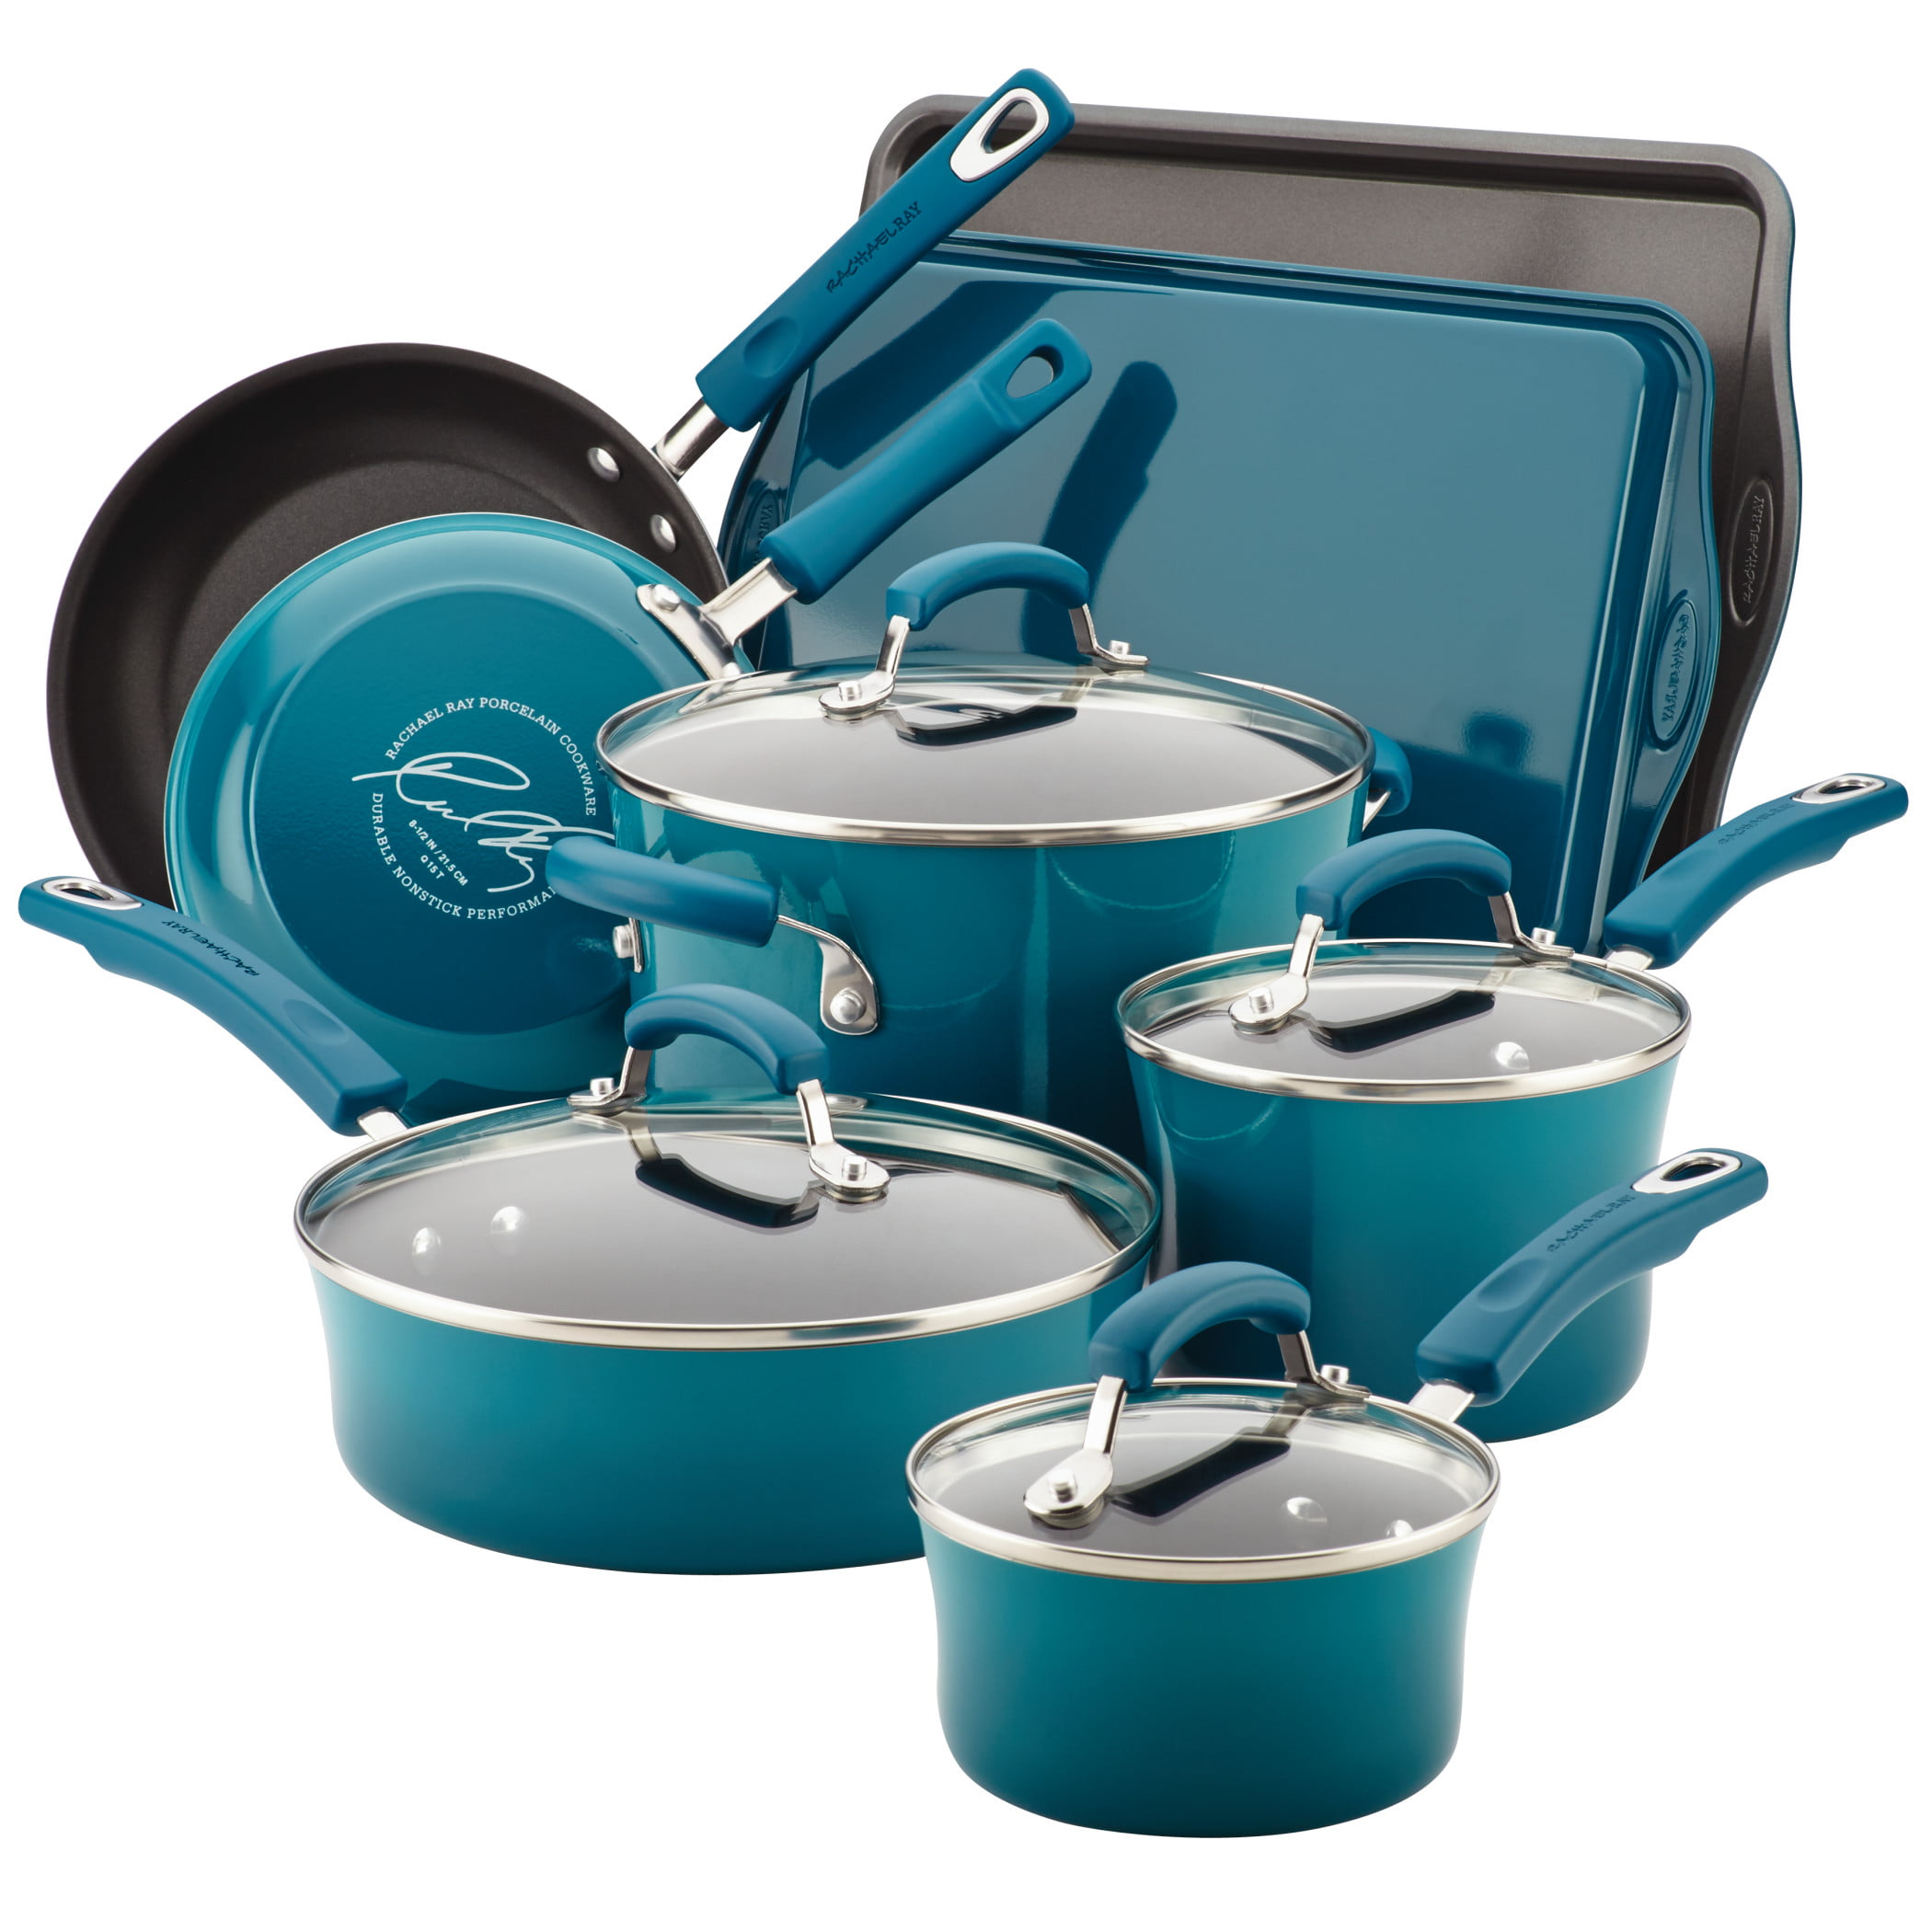 Rachael Ray 12-Piece Get Cooking! Nonstick Pots and Pans Set/Cookware Set, Turquoise